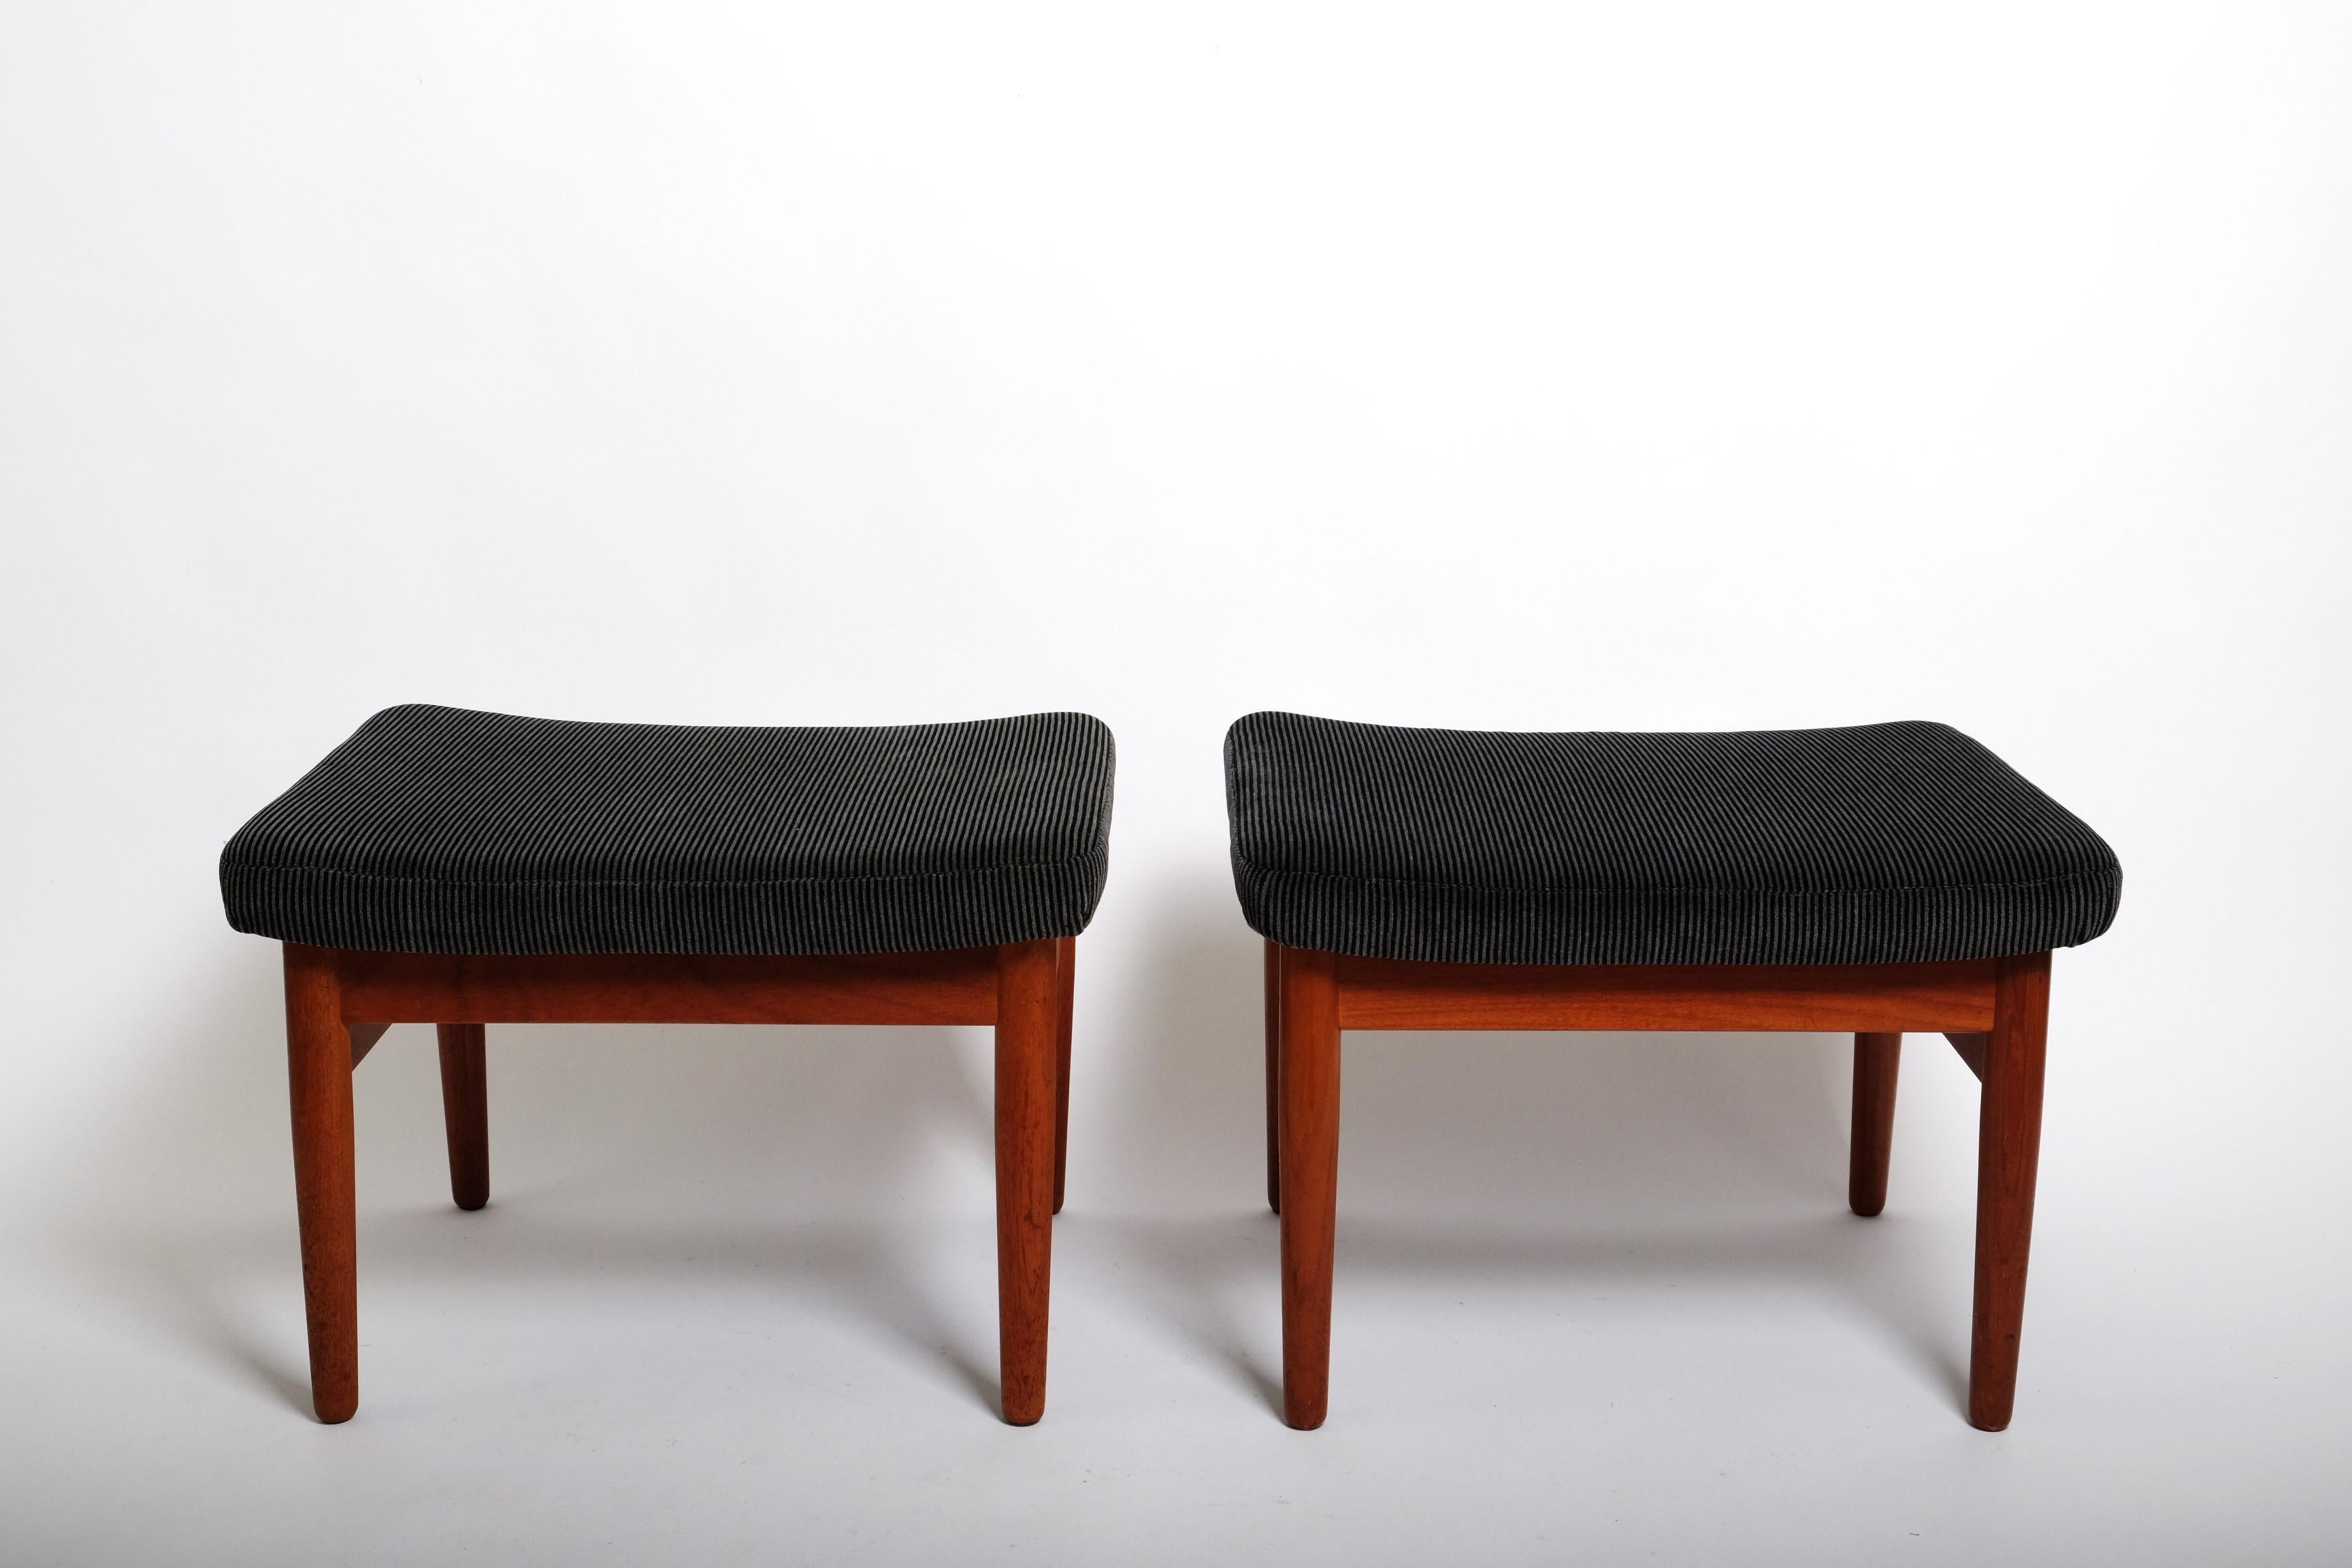 Two Mid-Century Stools by Arne Vodder FD164 Ottomans France & Son, Denmark 1960s In Good Condition For Sale In München, BY